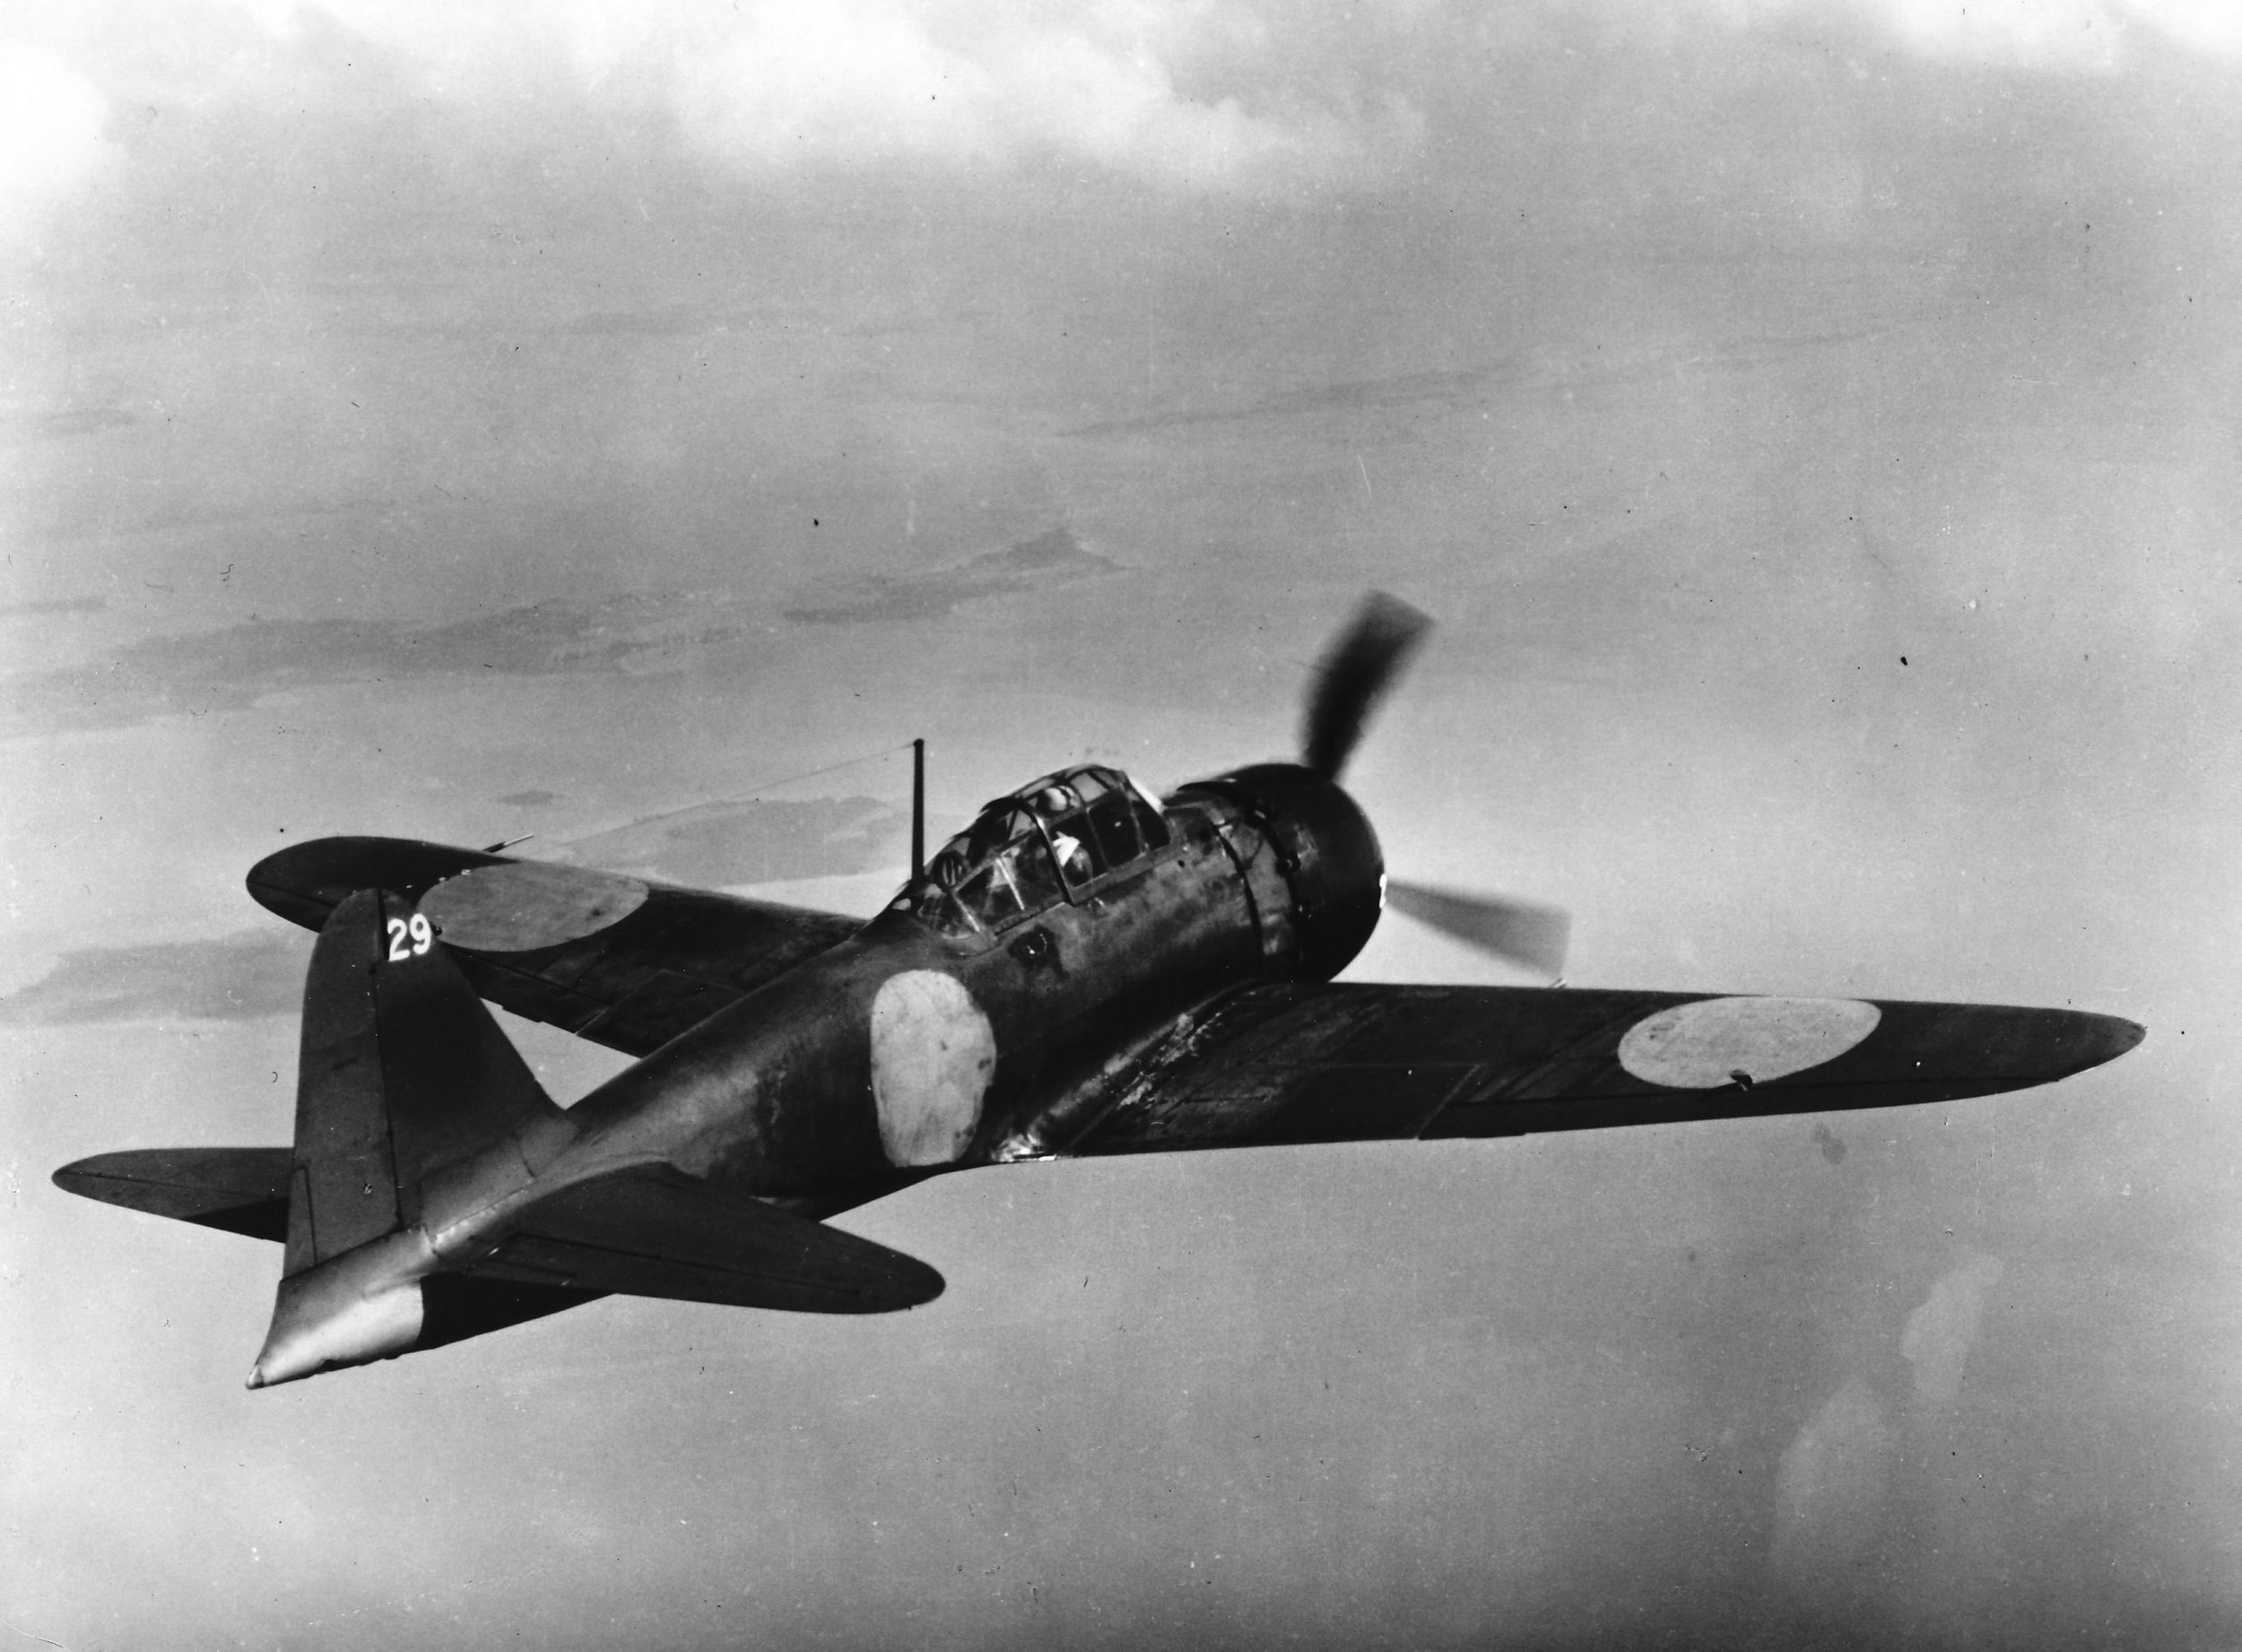 The Japanese Mitsubishi A6M Zero fighter dominated the skies above the Pacific early in World War II. Later American aircraft types surpassed the performance of the nimble Zero.